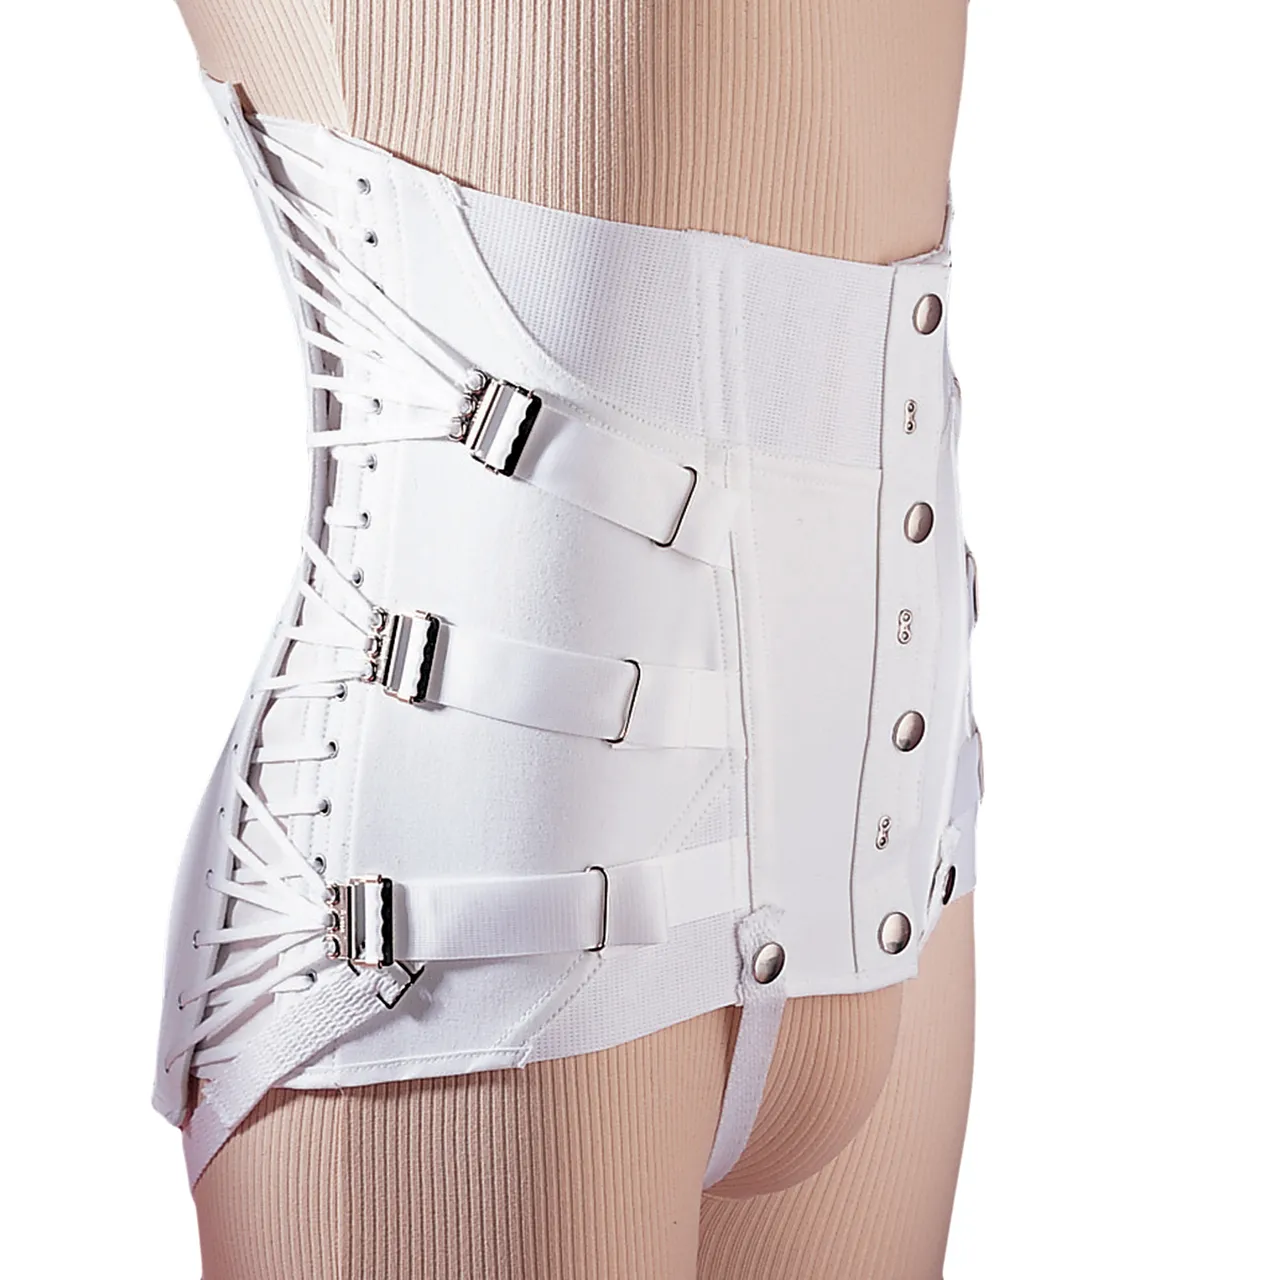 Freeman - From: 560-44 To: 566-56 - Manufacturing Women's Lumbosacral Support